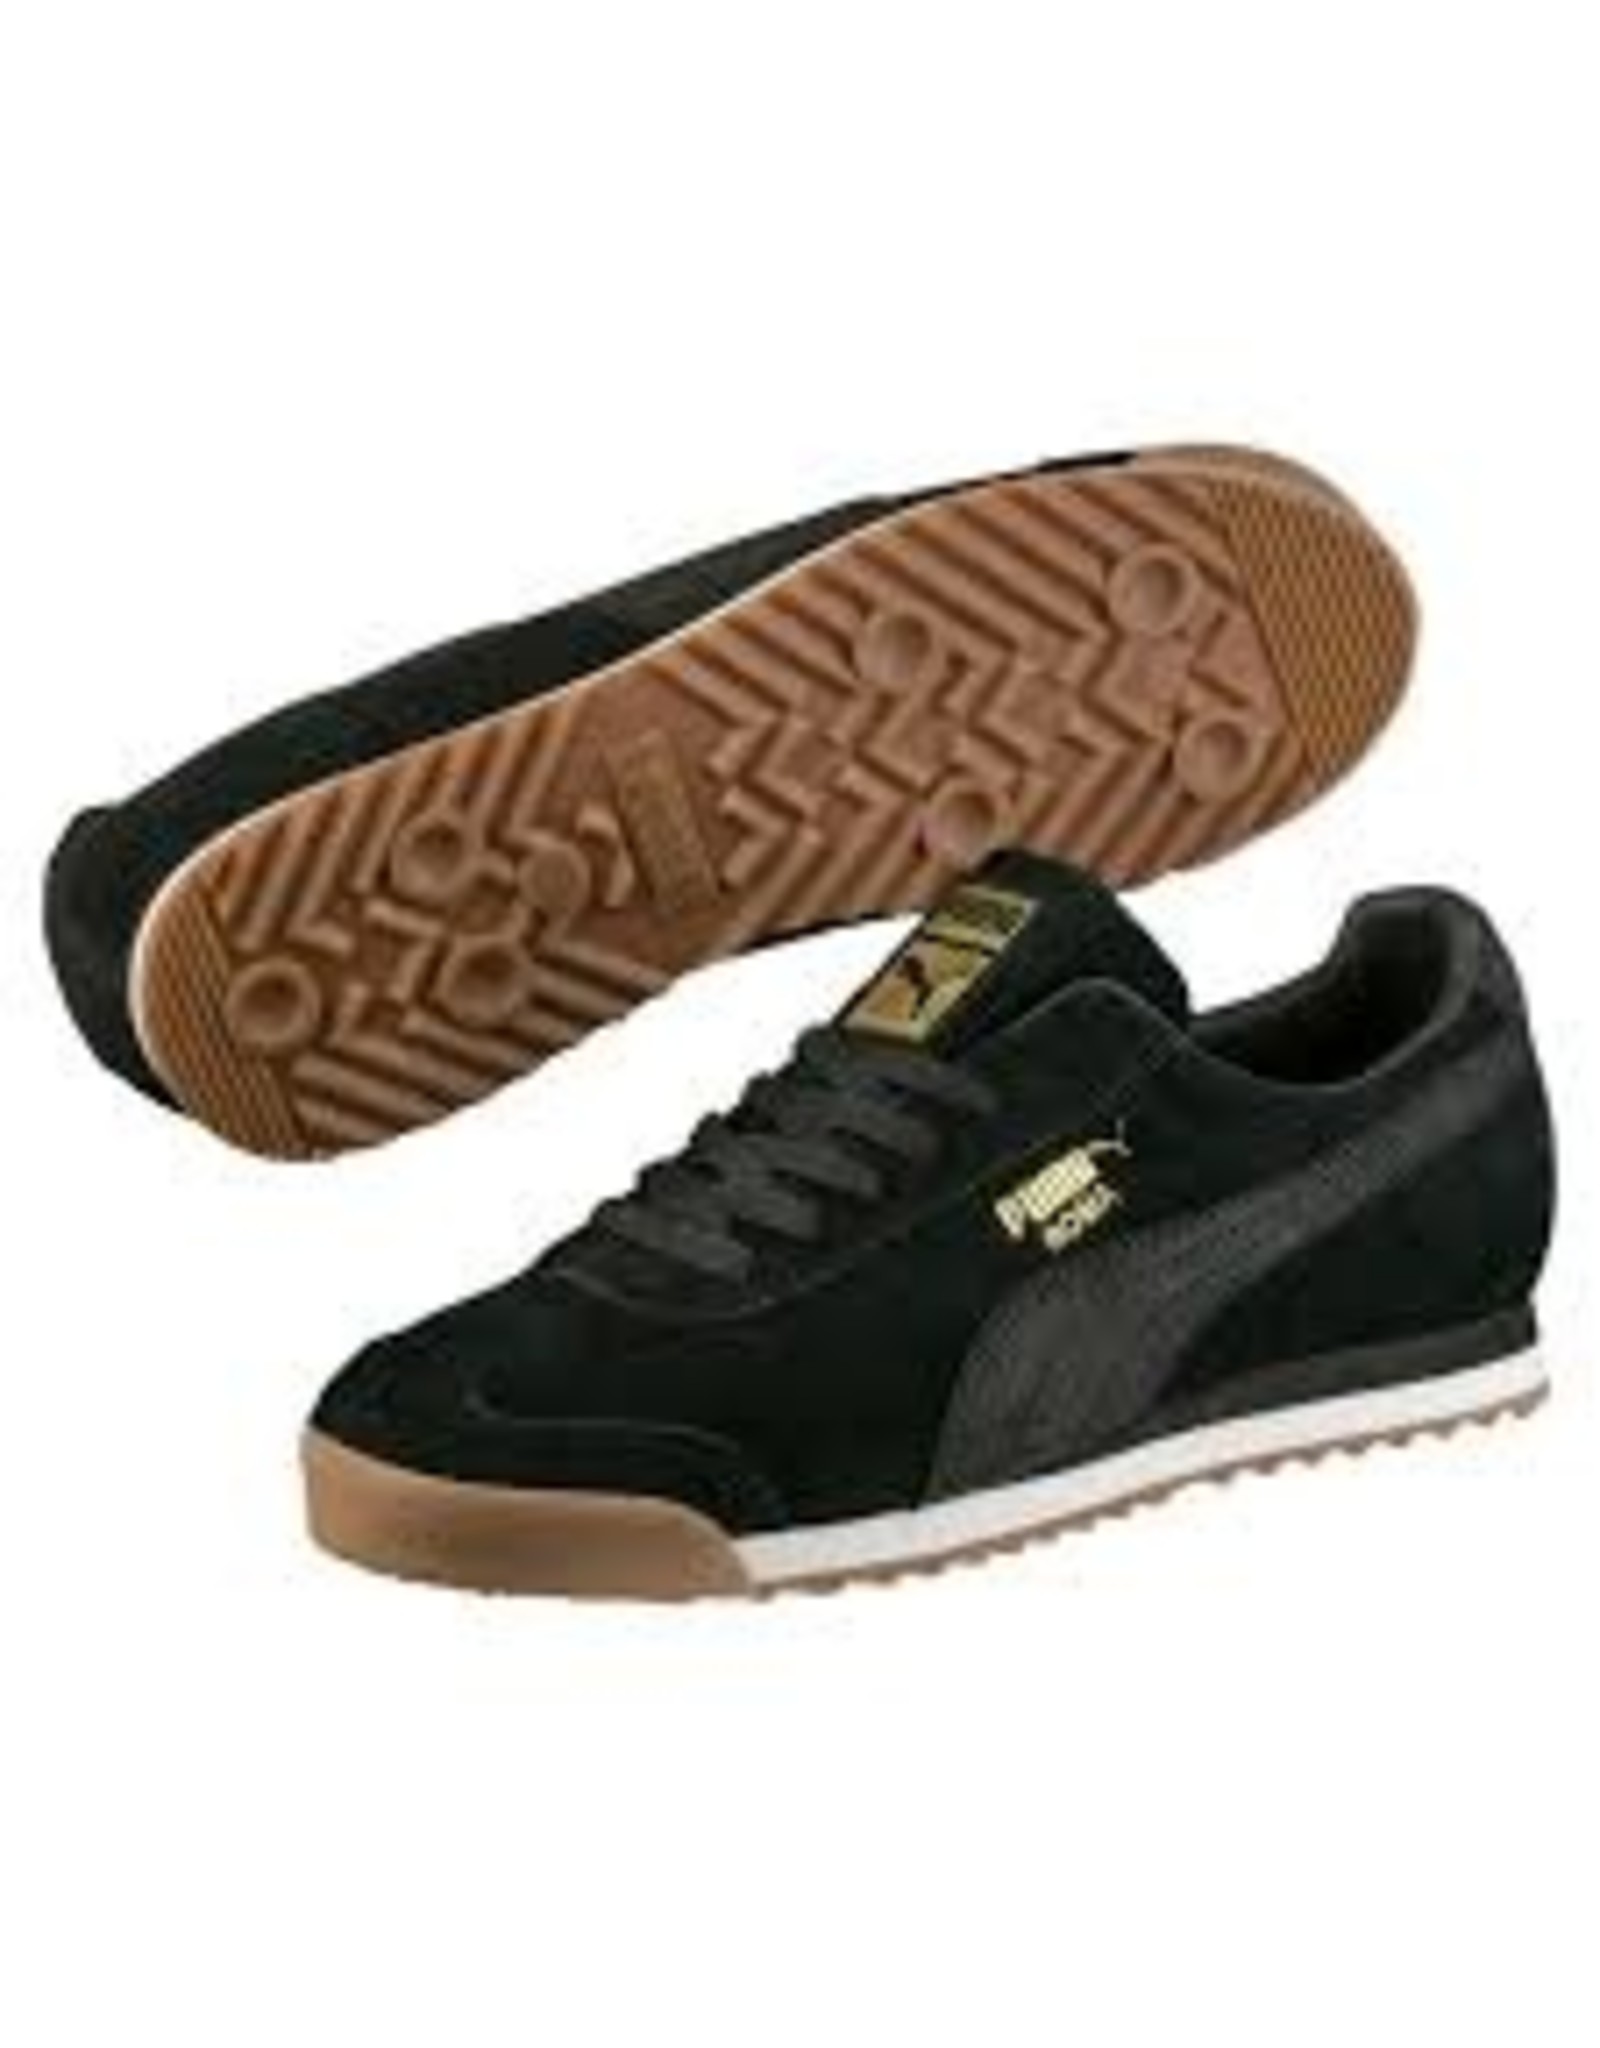 PUMA ROMA NATURAL WARMTH - BCF Sporting Goods and Uniform Store